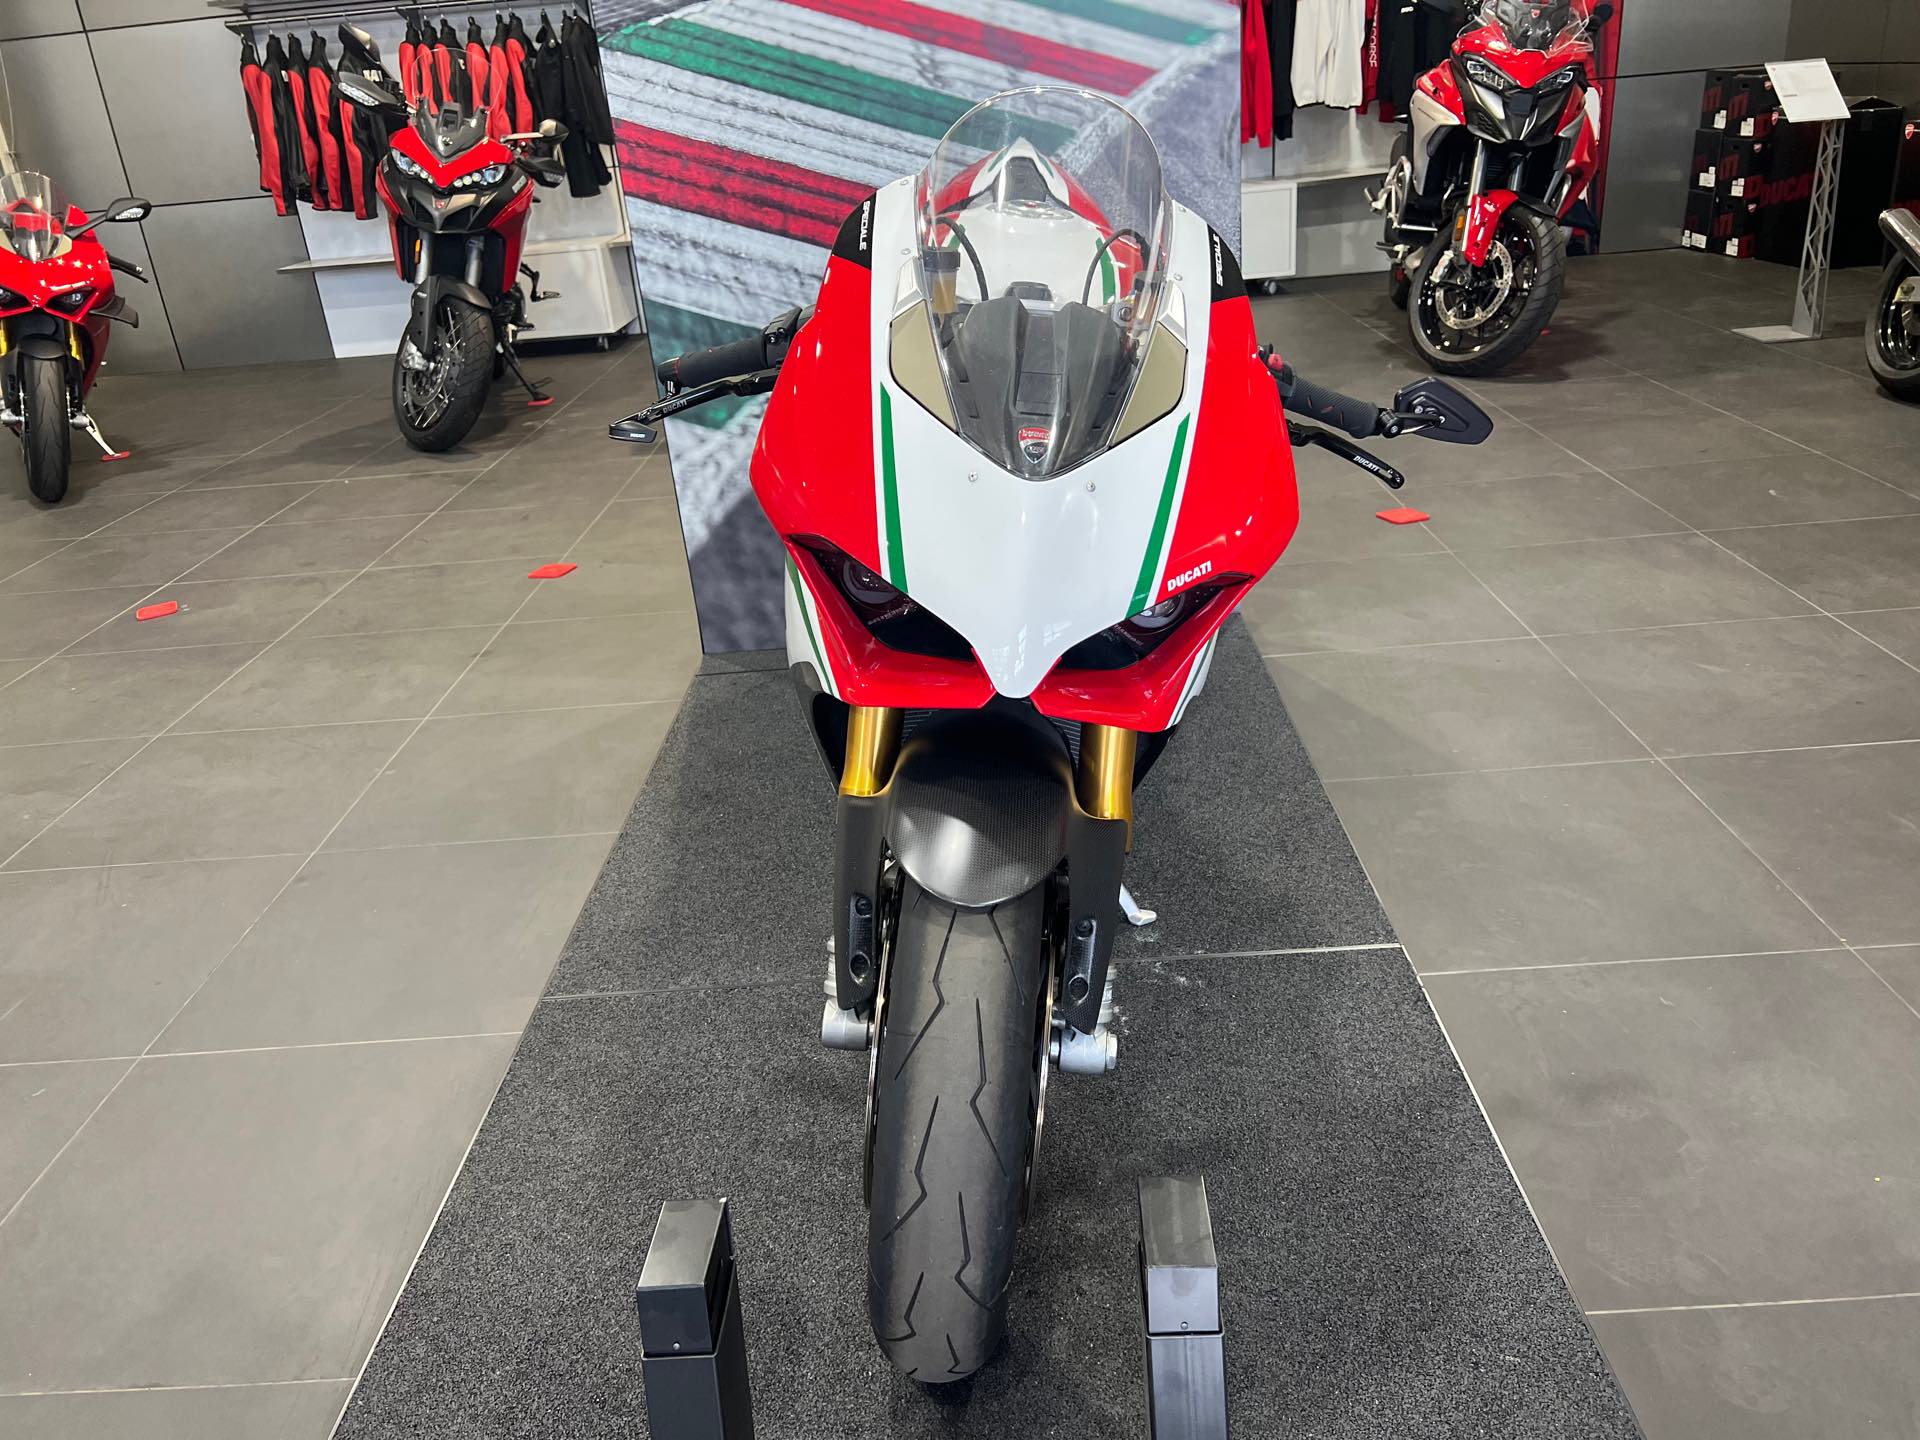 2018 Ducati Panigale V4 Speciale at Aces Motorcycles - Fort Collins